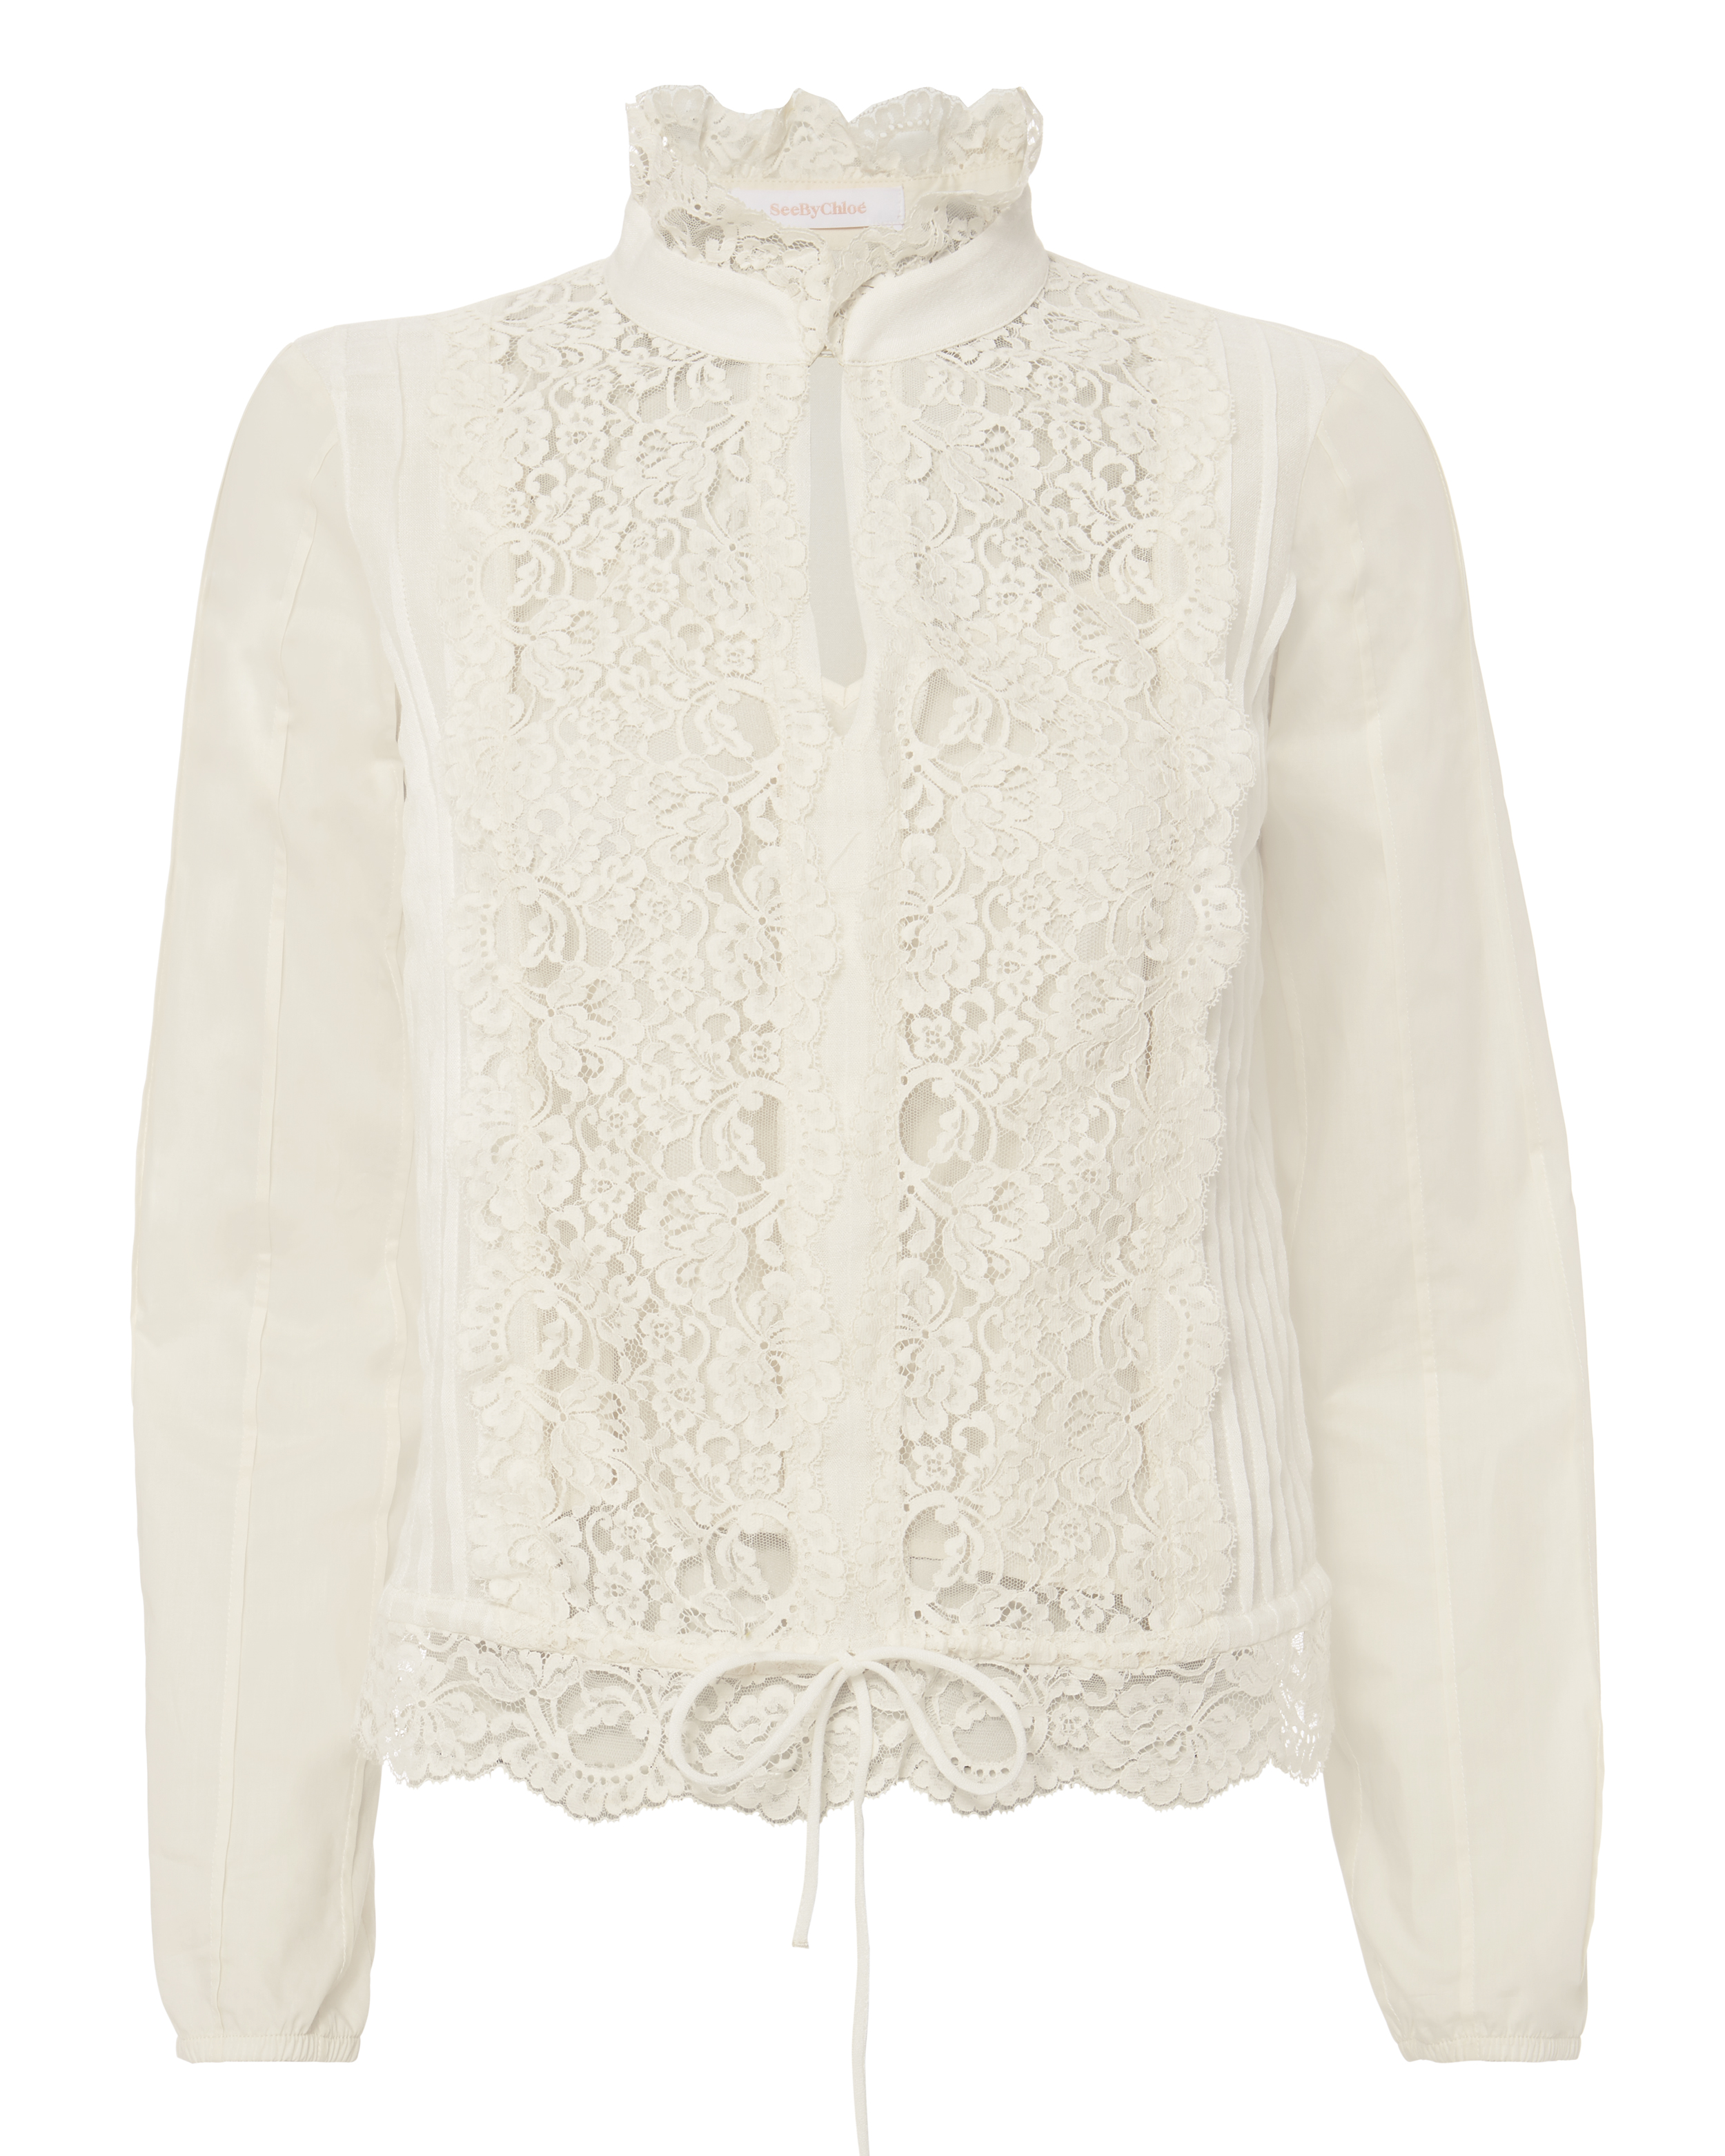 See by Chloé Lace Panel Victorian Blouse - INTERMIX®